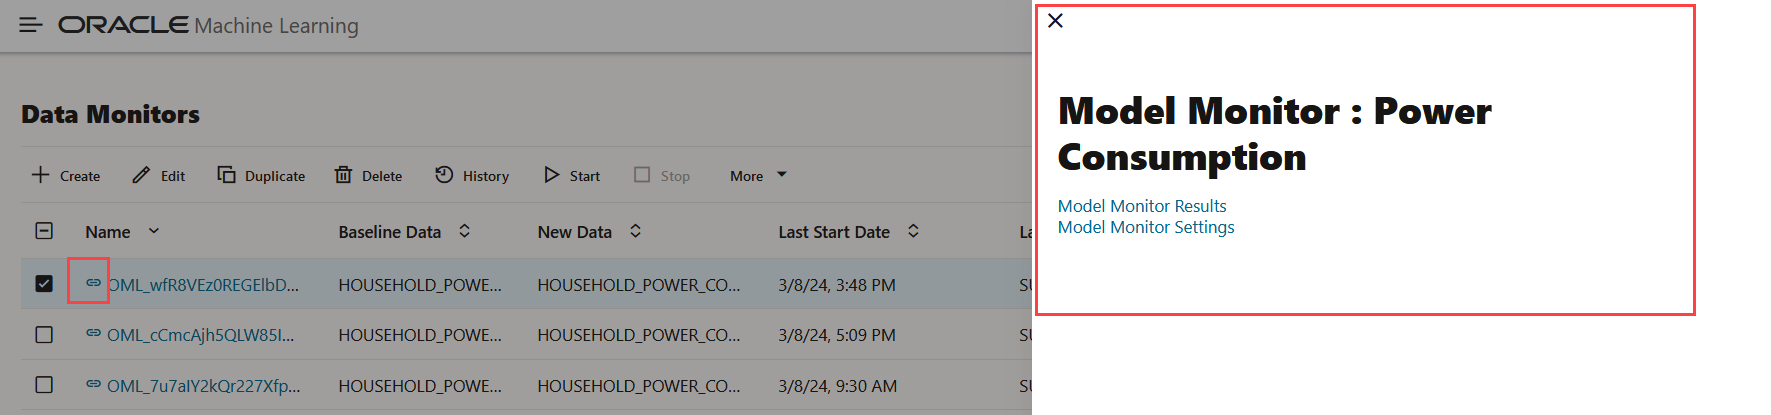 Data Monitors page displaying the associated model monitors results and settings